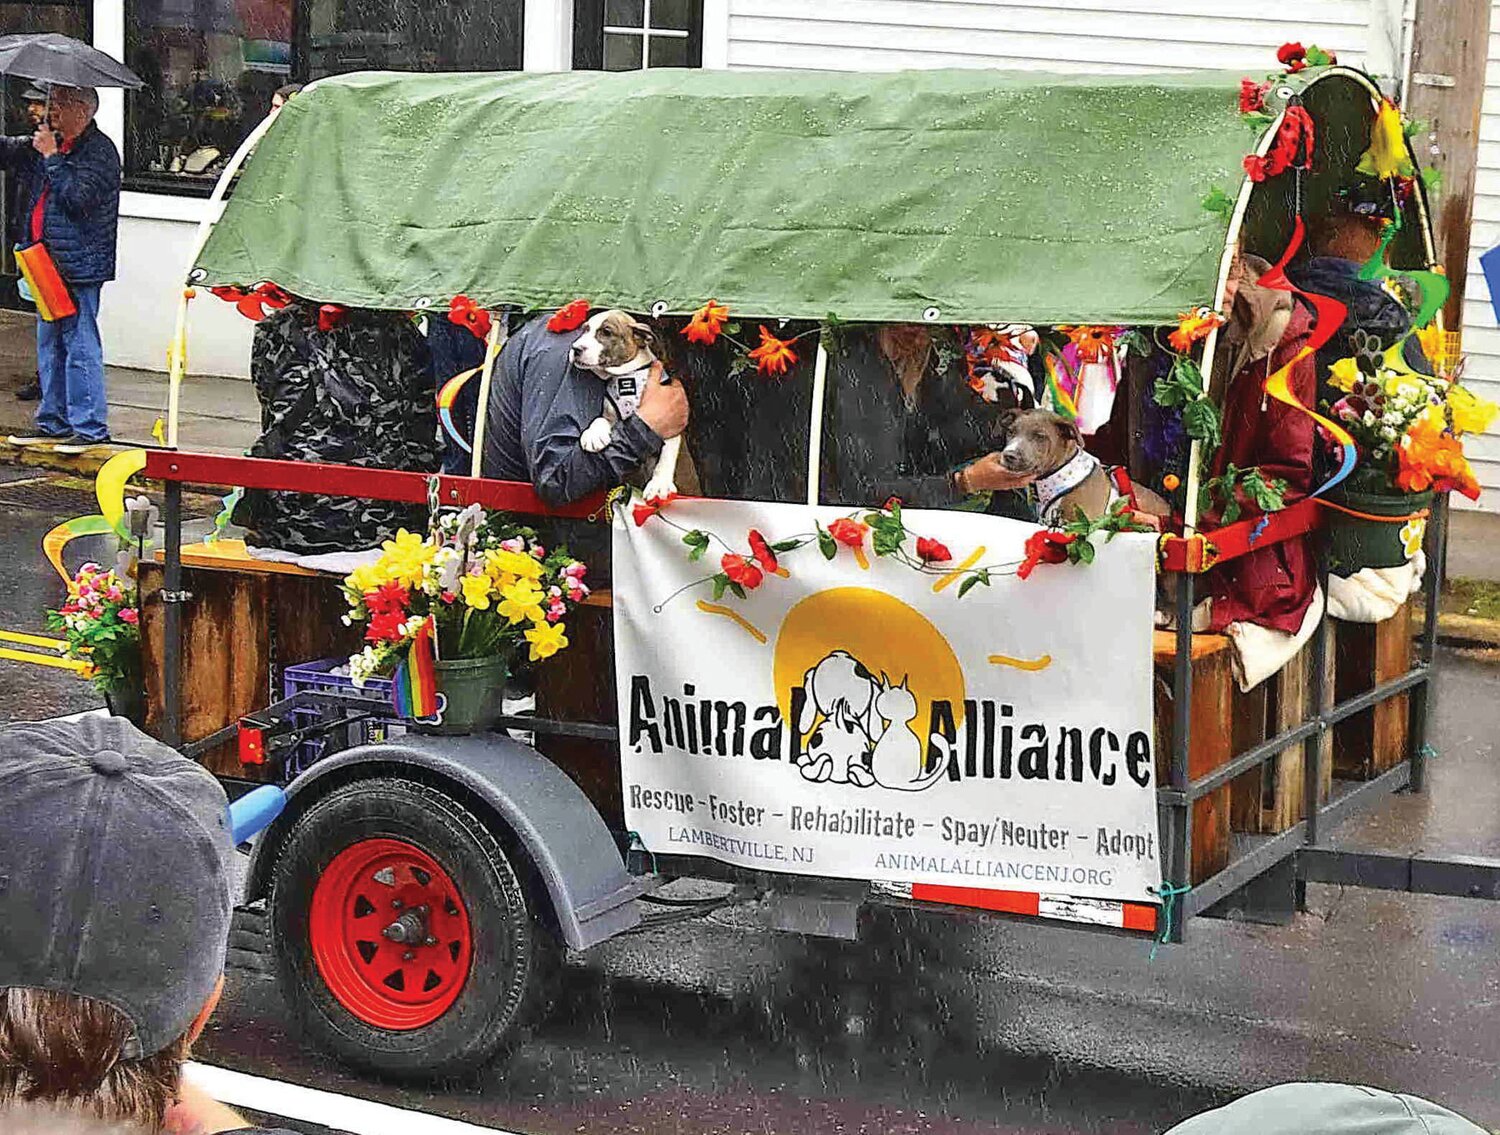 The Animal Alliance parade float.